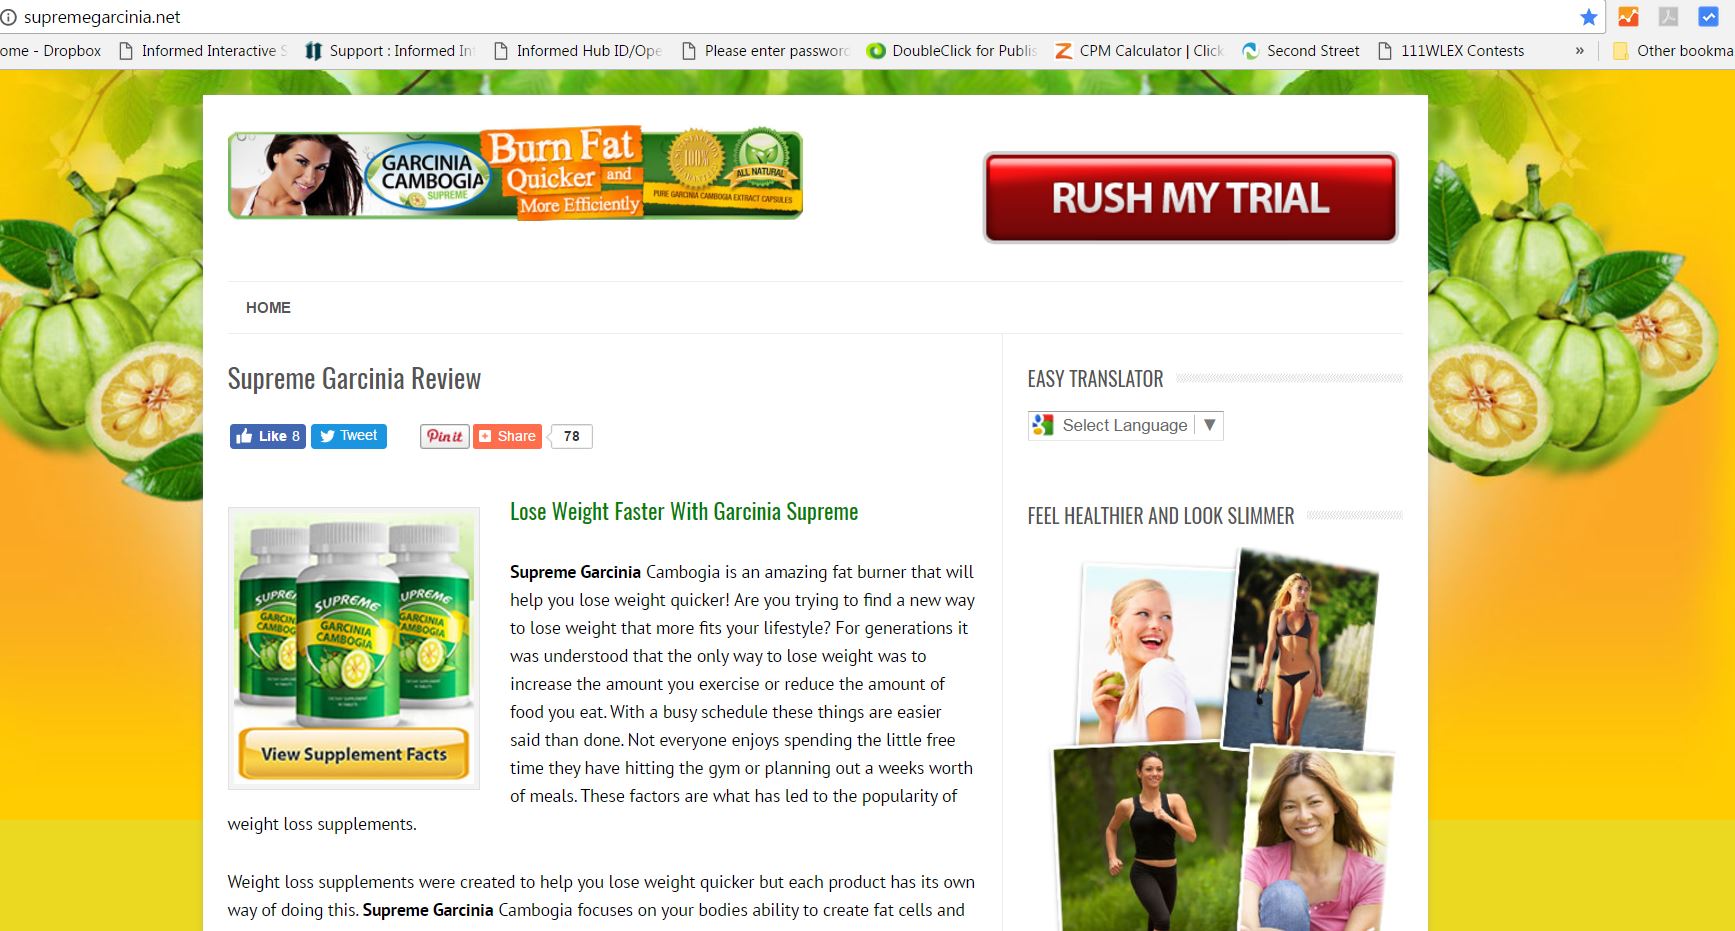 http://supremegarcinia.net/

Supreme Garcinia Cambogia
Promoted as a Shark Tank Product